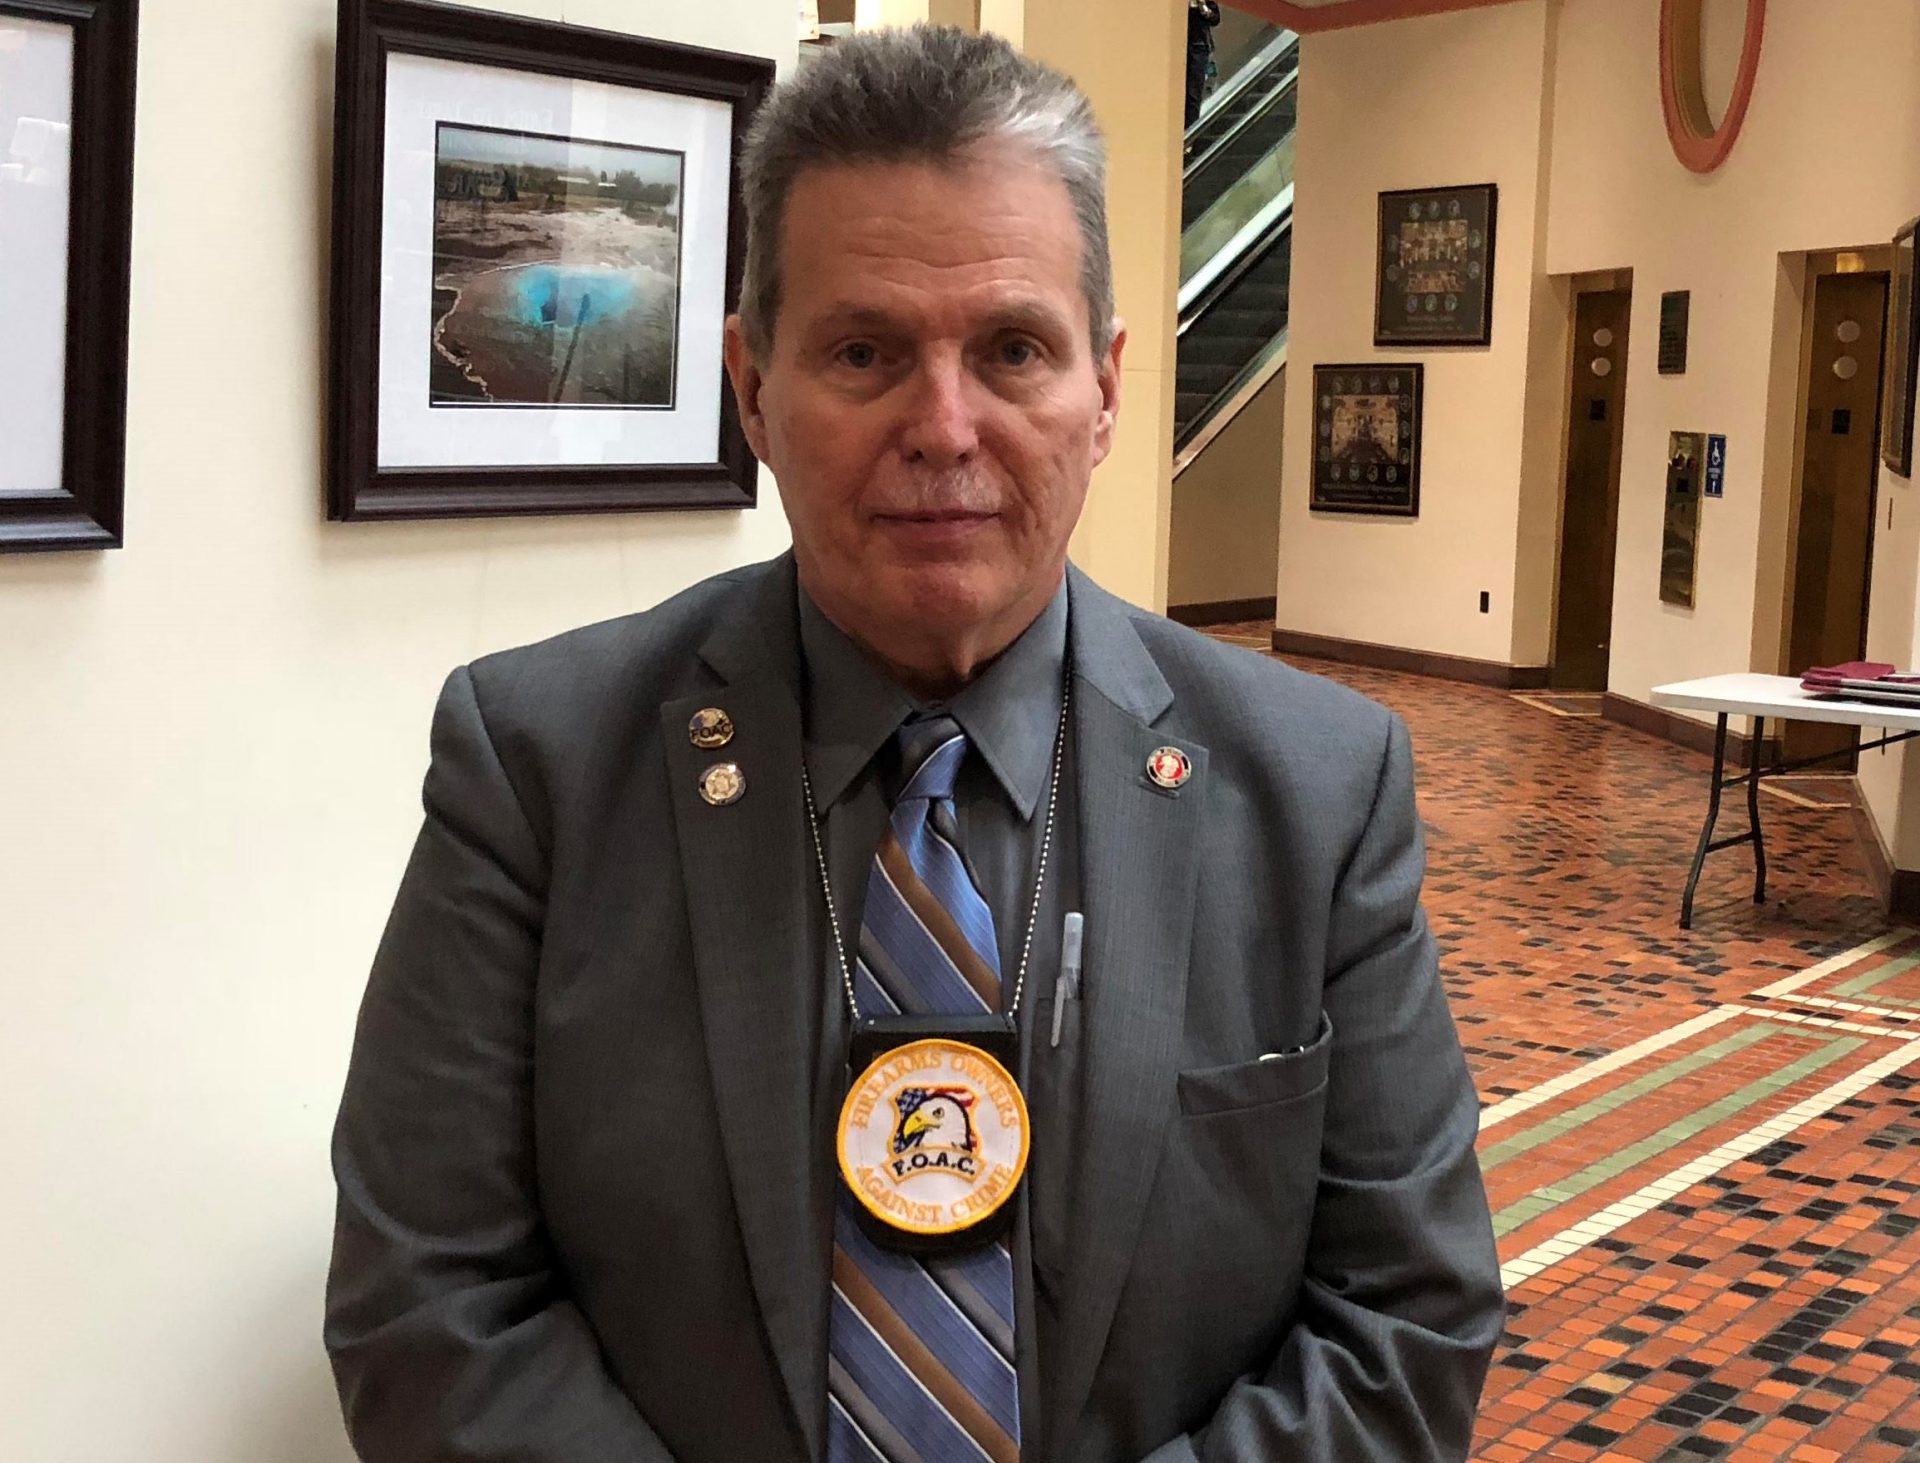 Kim Stolfer, president of Firearms Owners Against Crime, was at the state Capitol on Sept. 24, 2018, to lobby against two gun bills.